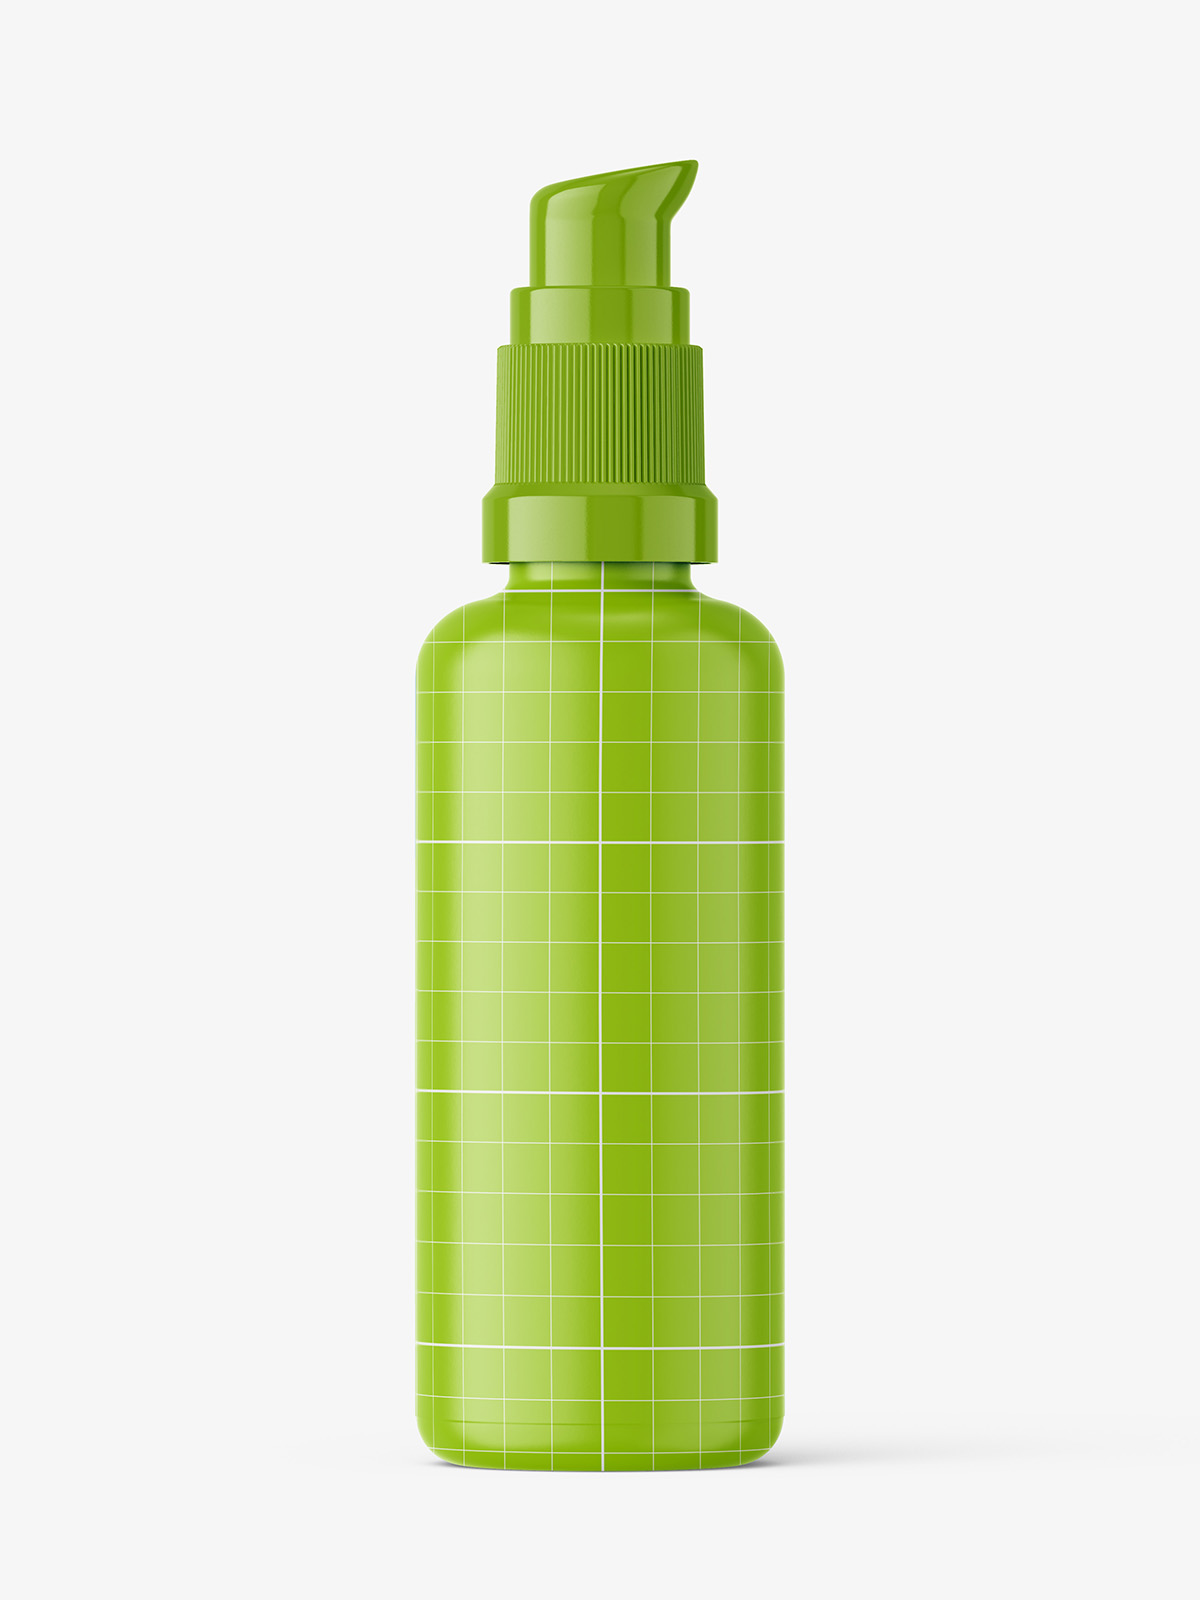 Download Airless Pump Bottle Mockup Amber Smarty Mockups Yellowimages Mockups